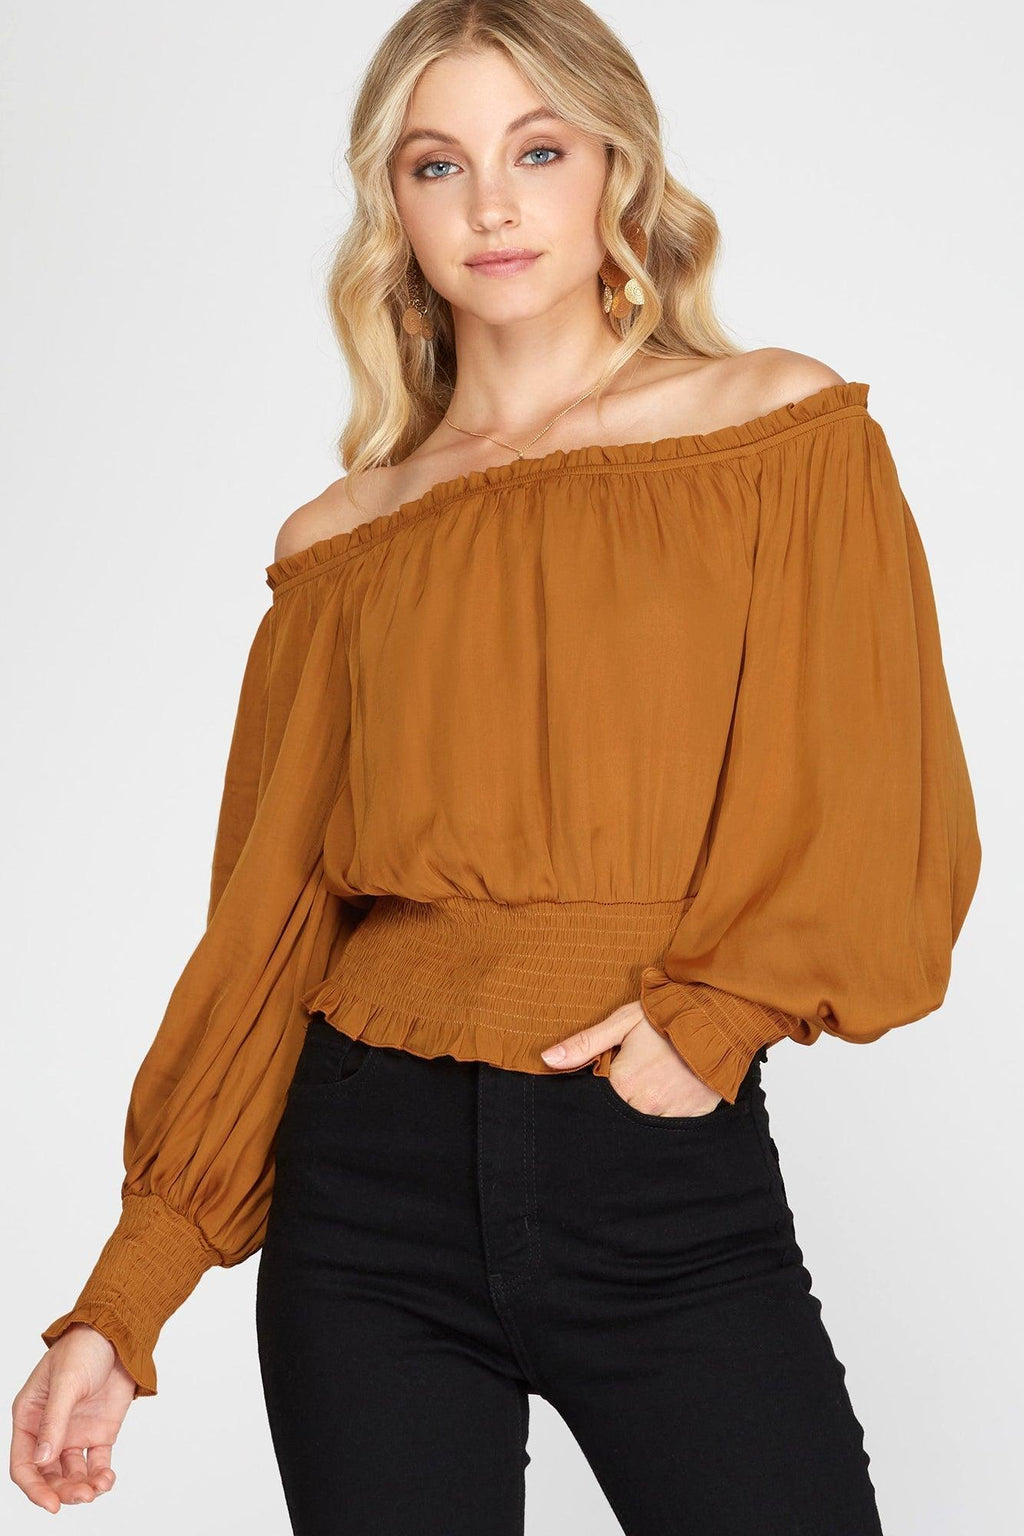 Balloon Sleeve Off Shoulder Top - Caramel - Pineapple Lain Boutique